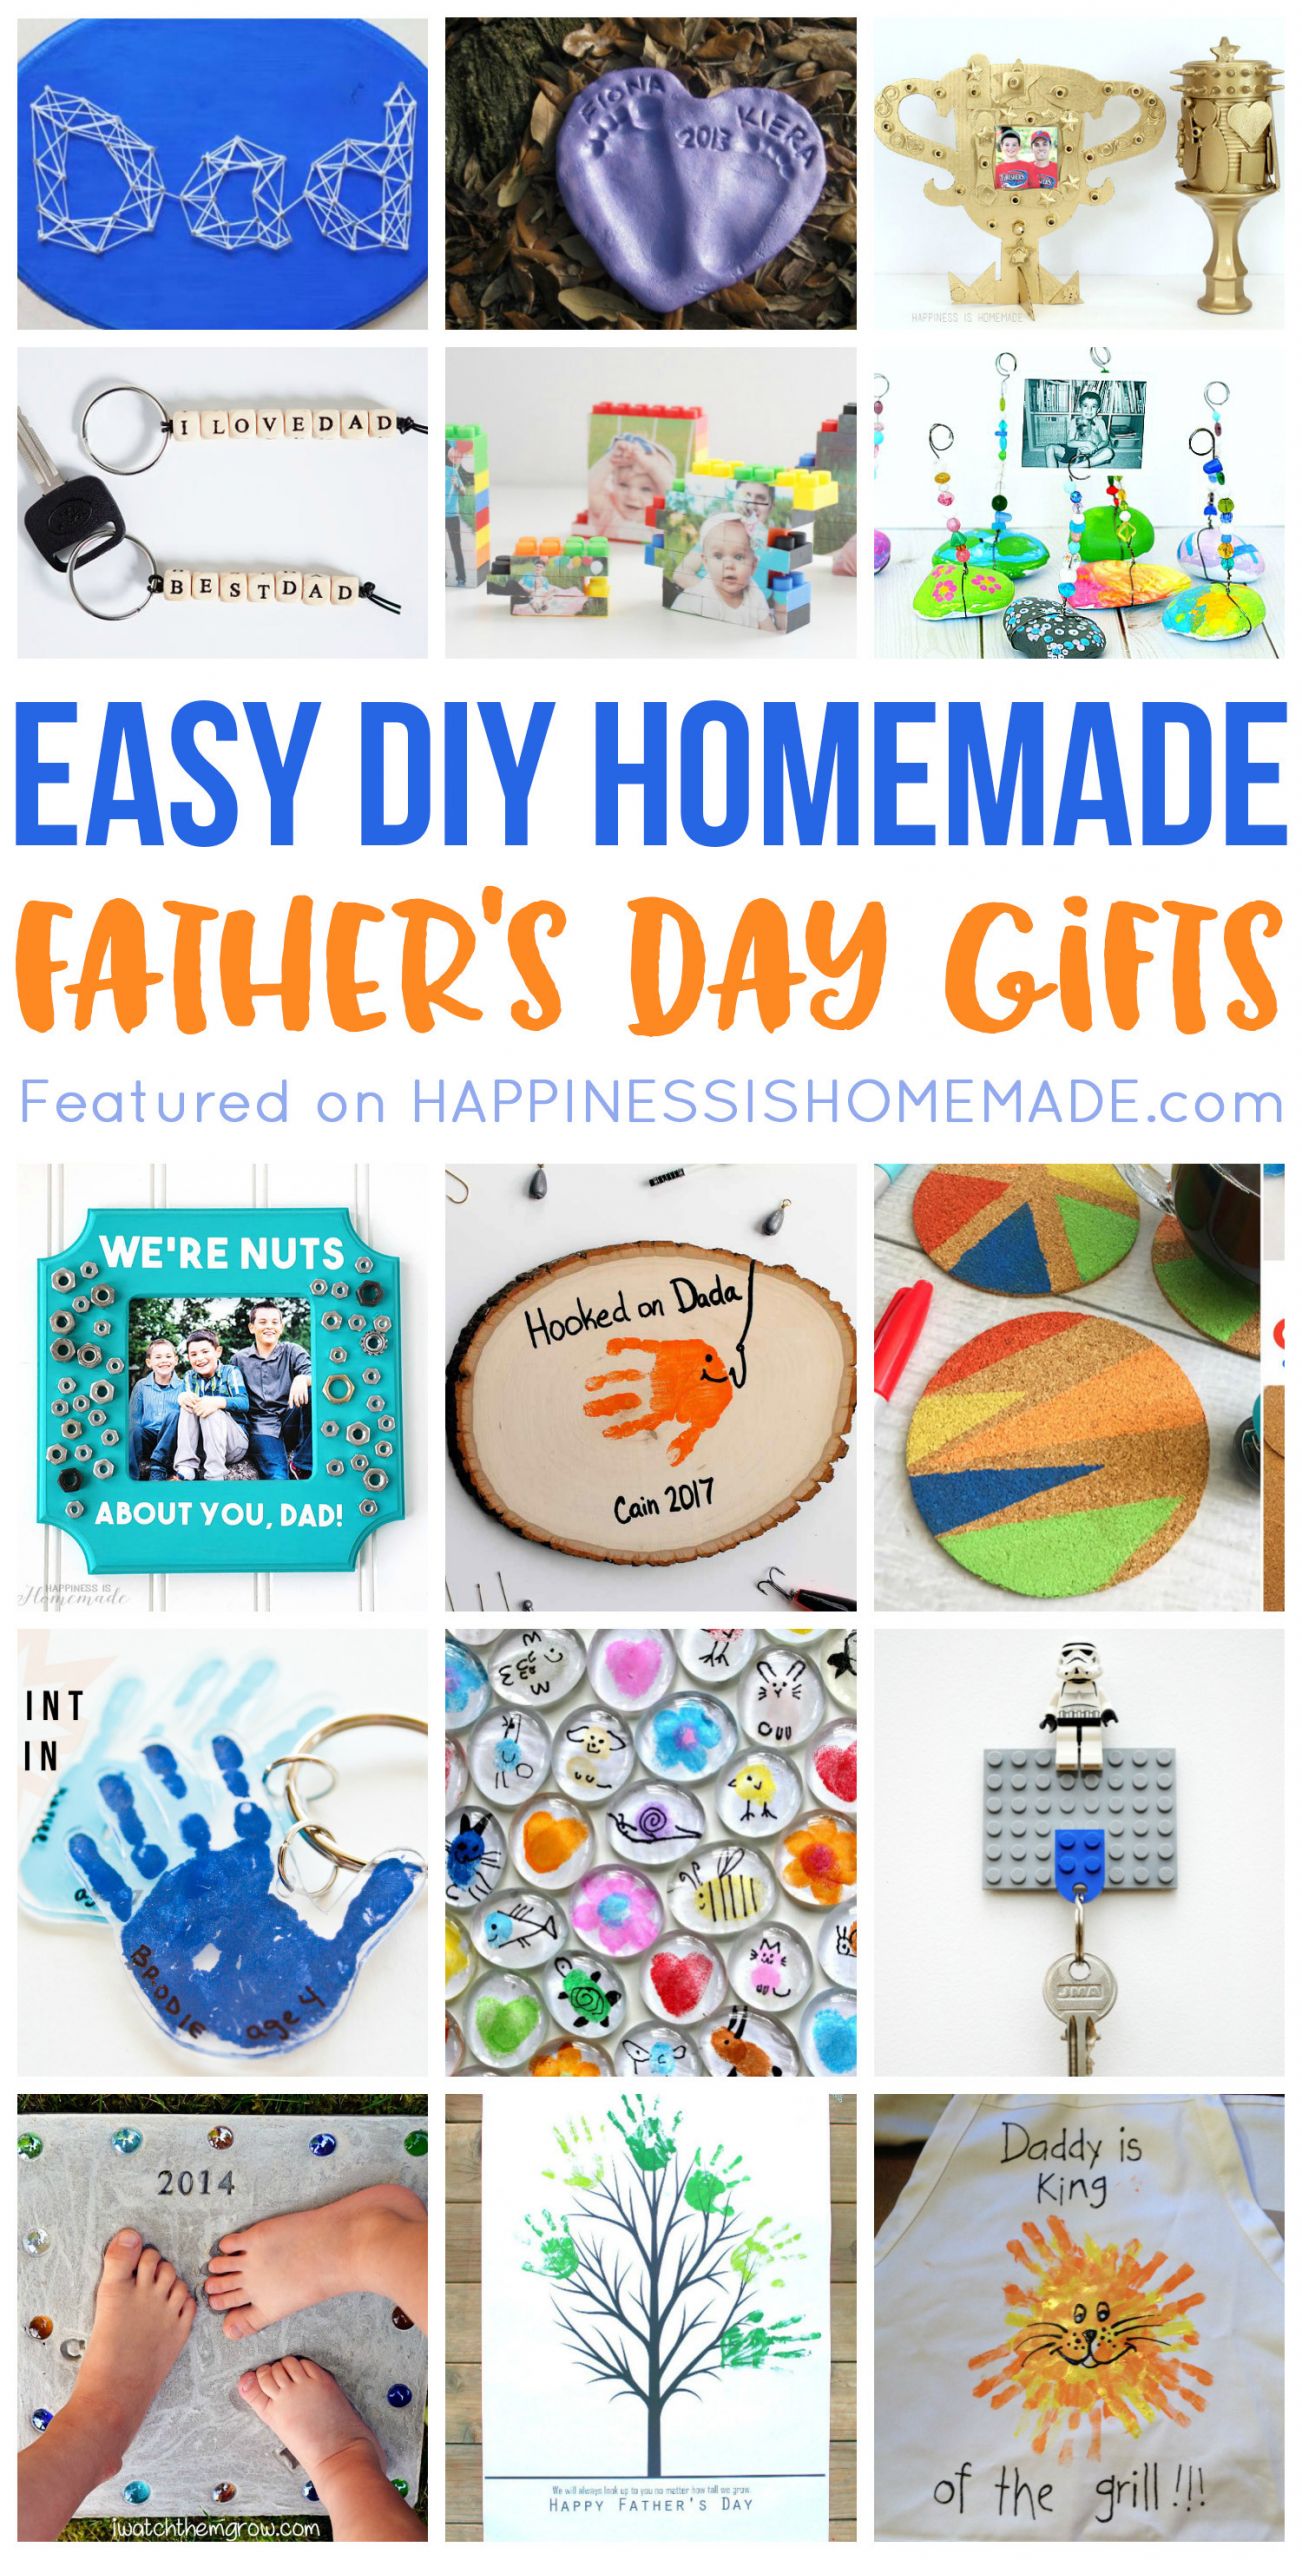 Fathersday Gifts From Kids
 20 Homemade Father s Day Gifts That Kids Can Make